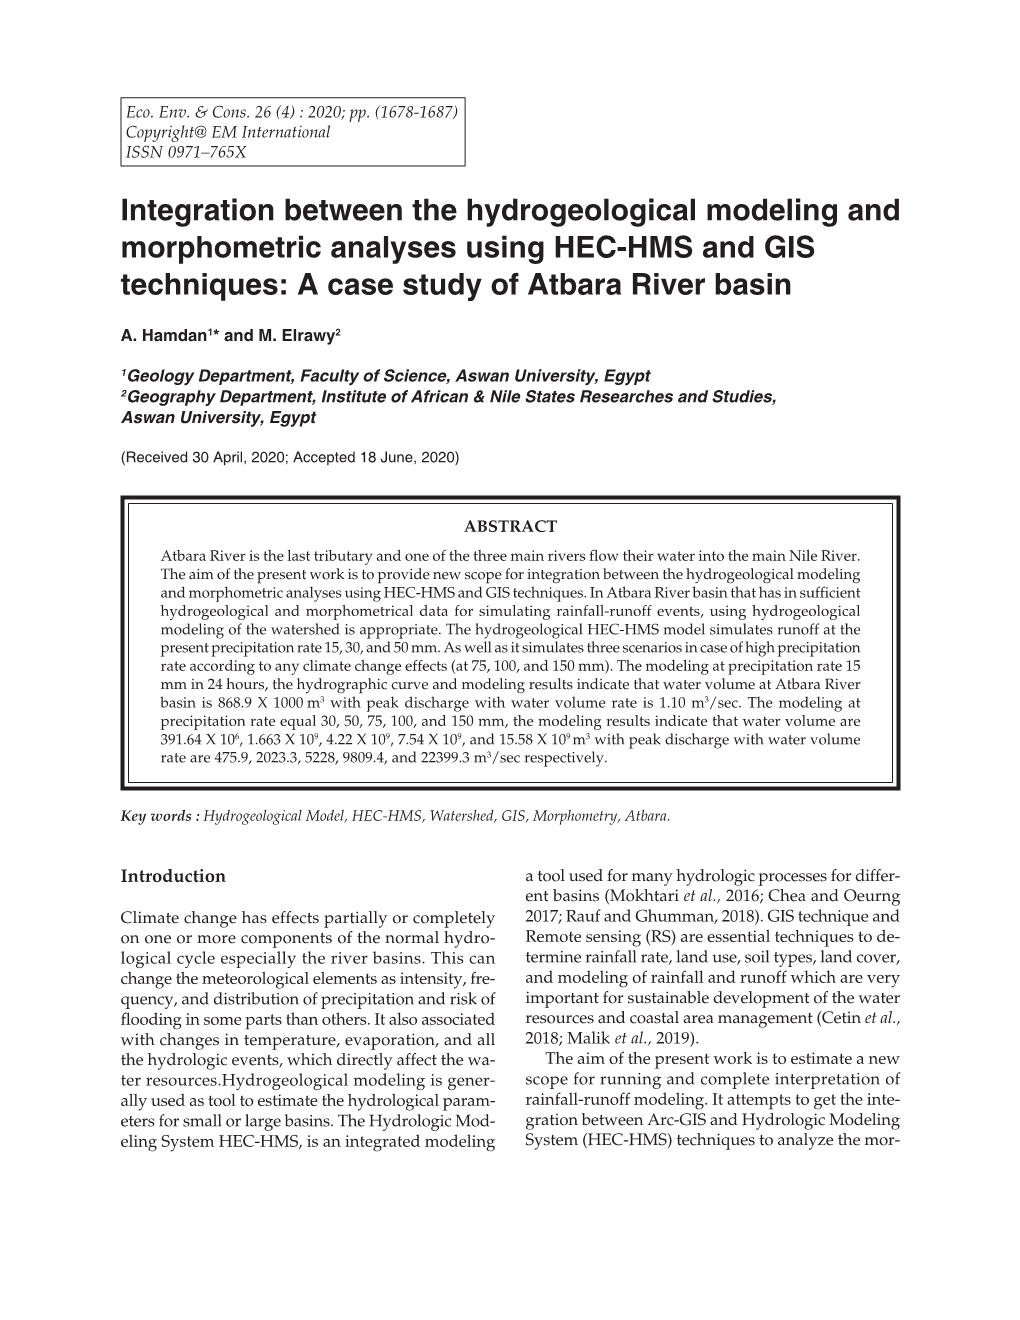 Integration Between the Hydrogeological Modeling and Morphometric Analyses Using HEC-HMS and GIS Techniques: a Case Study of Atbara River Basin